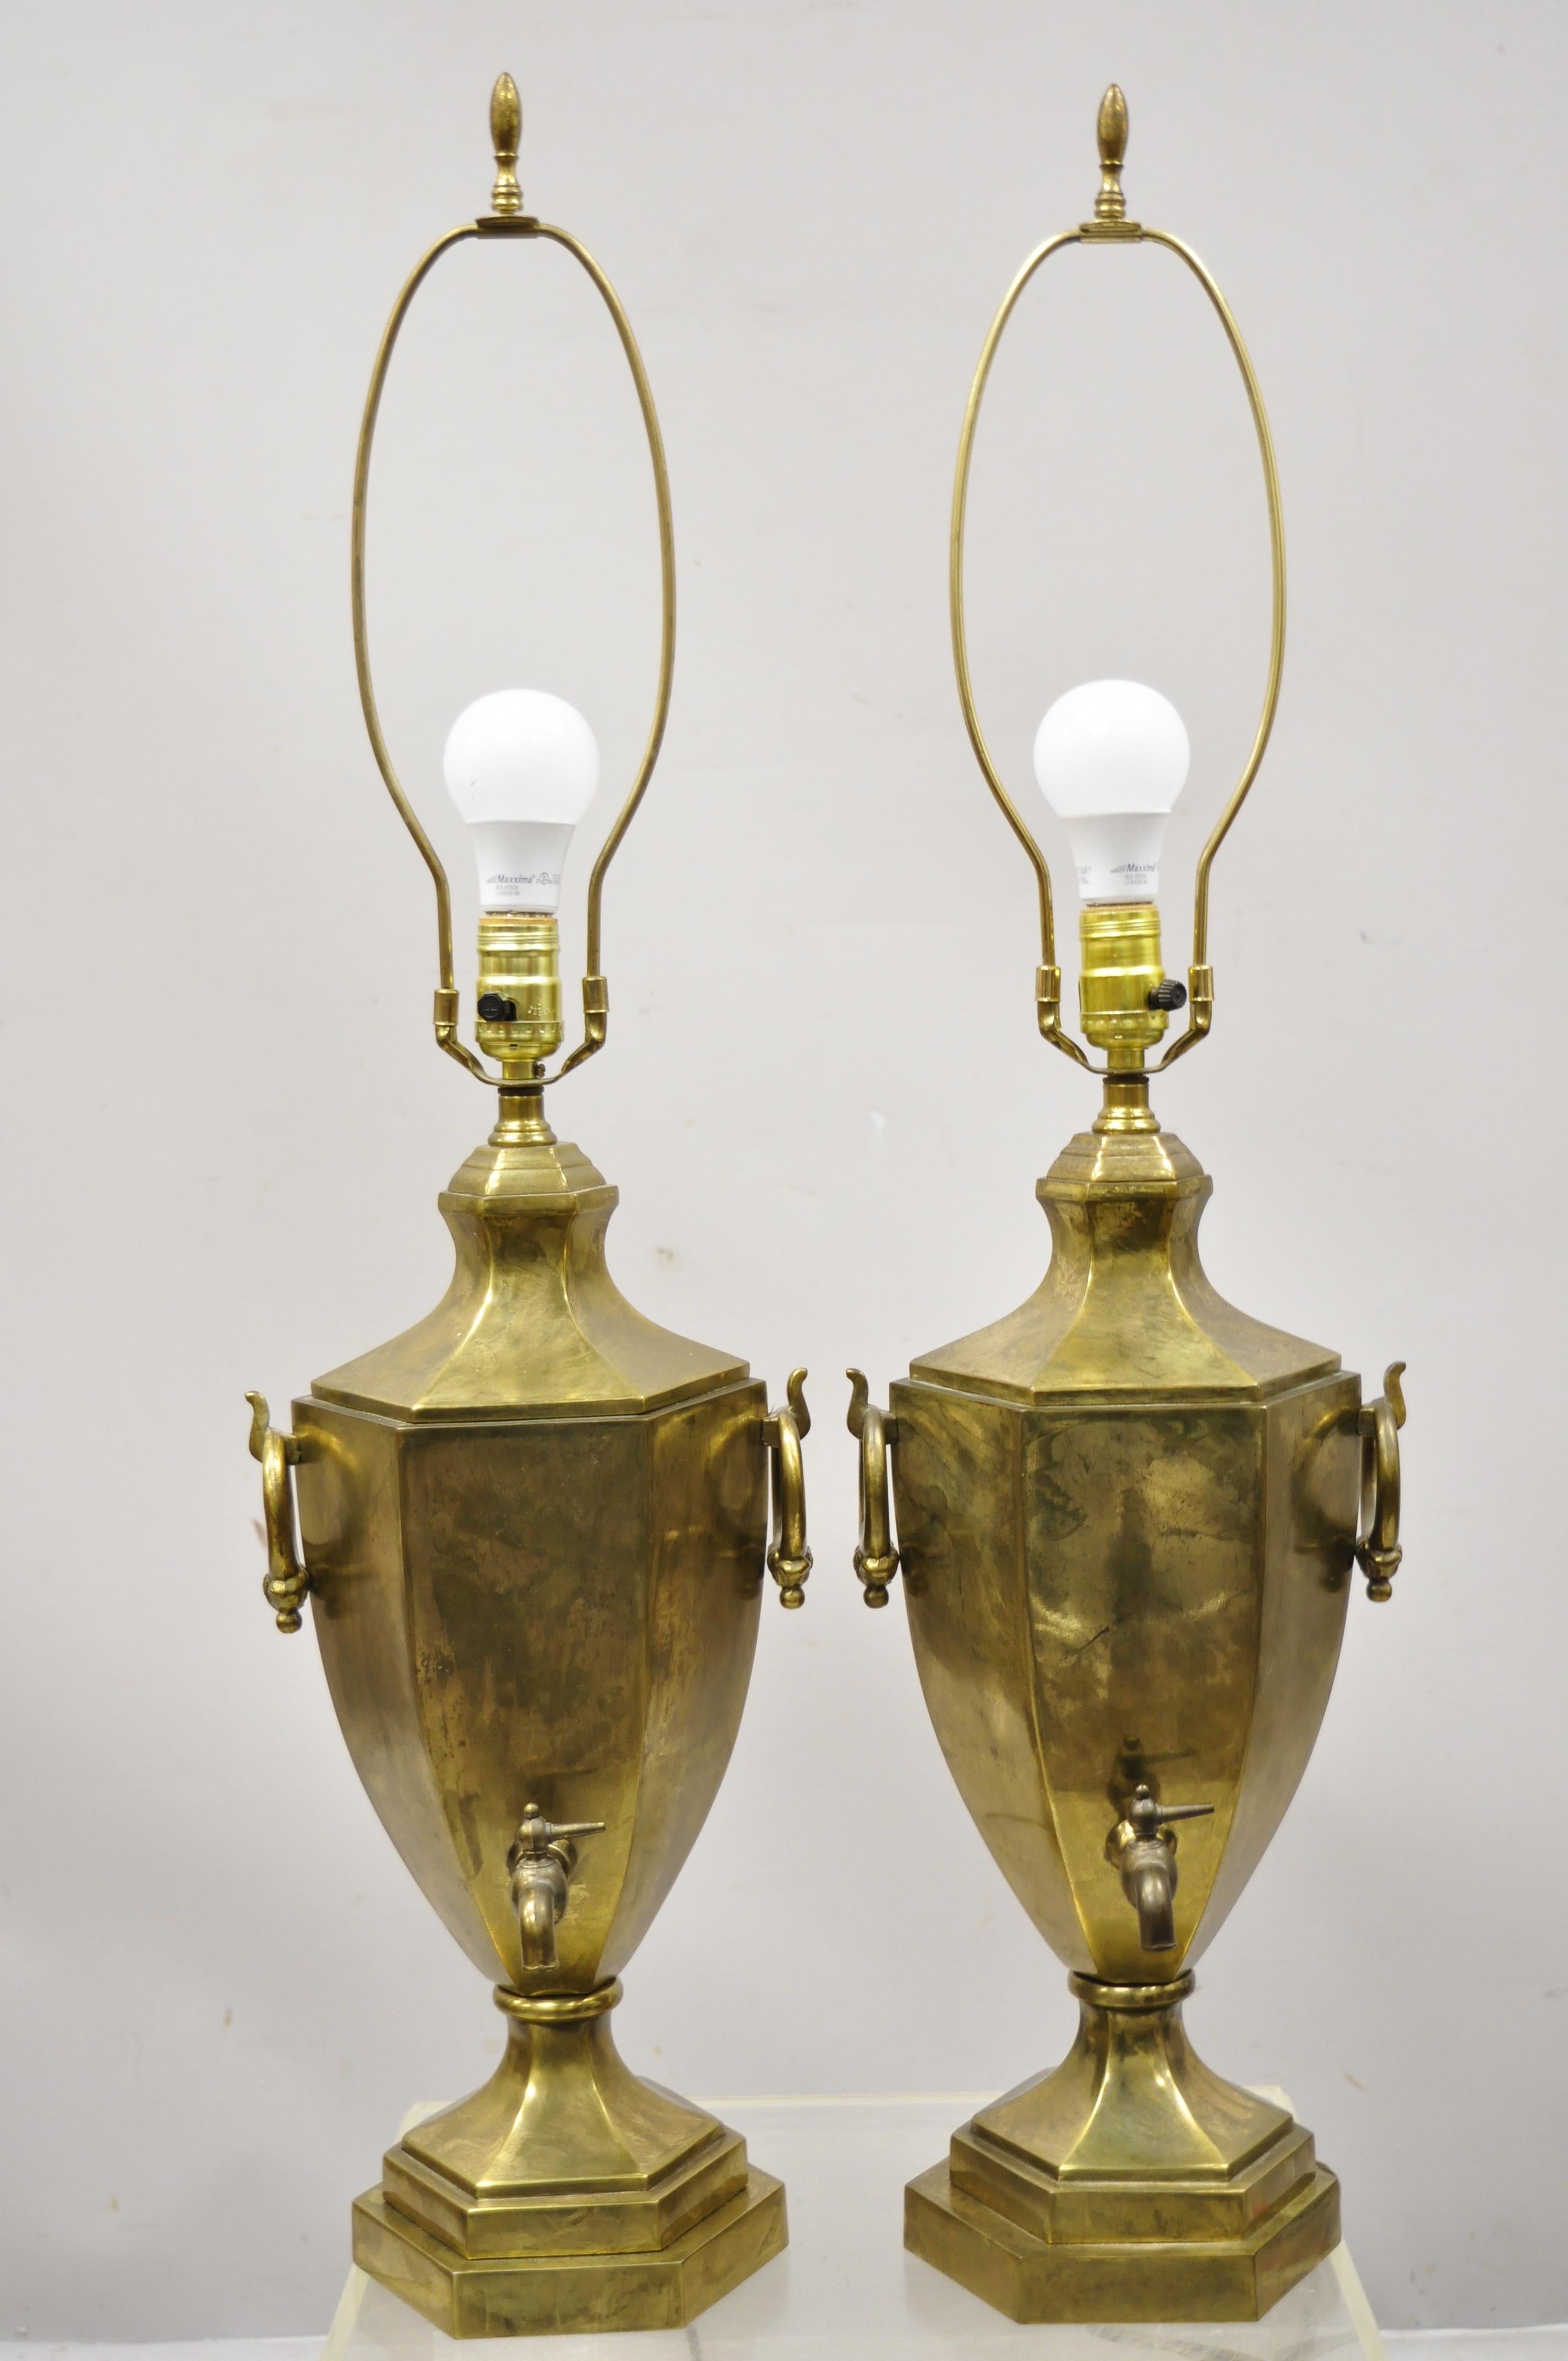 Paul Hanson burnished brass samovar urn form table lamps with shades - a pair. Item features urn form bodies, brown 